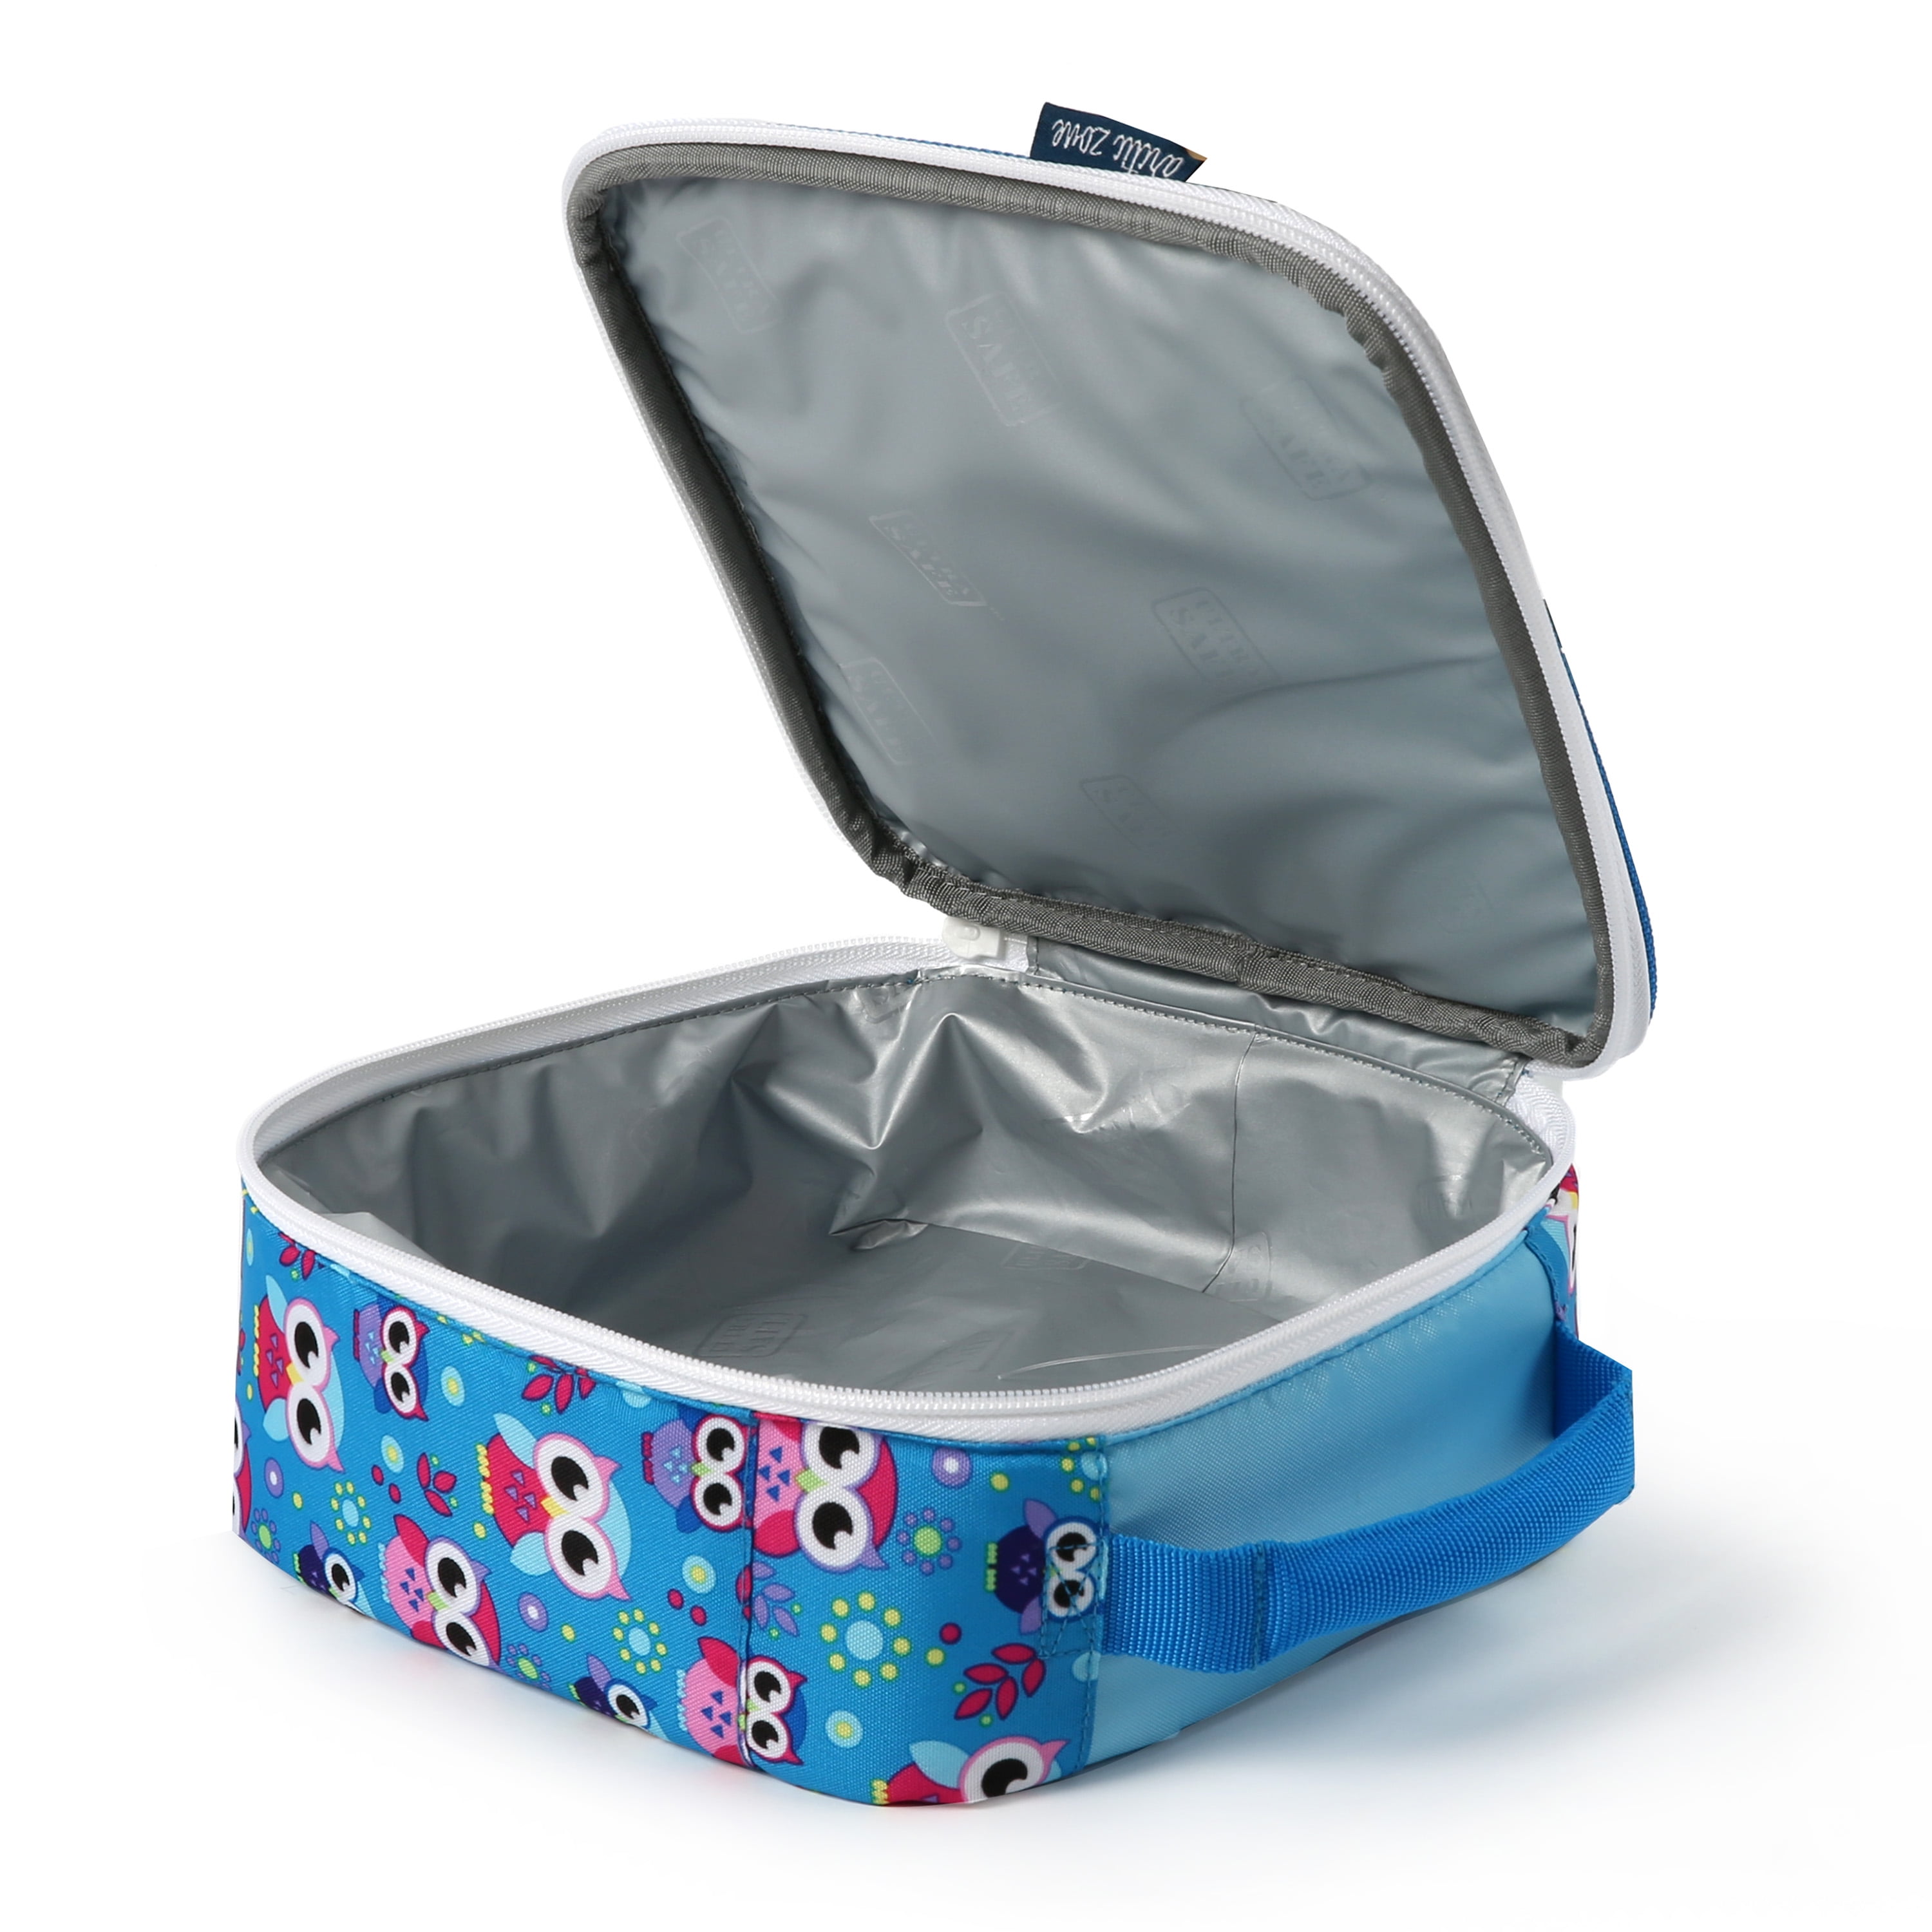 Arctic Zone Upright Reusable Lunch Box Combo with Accessories, Unicorn 